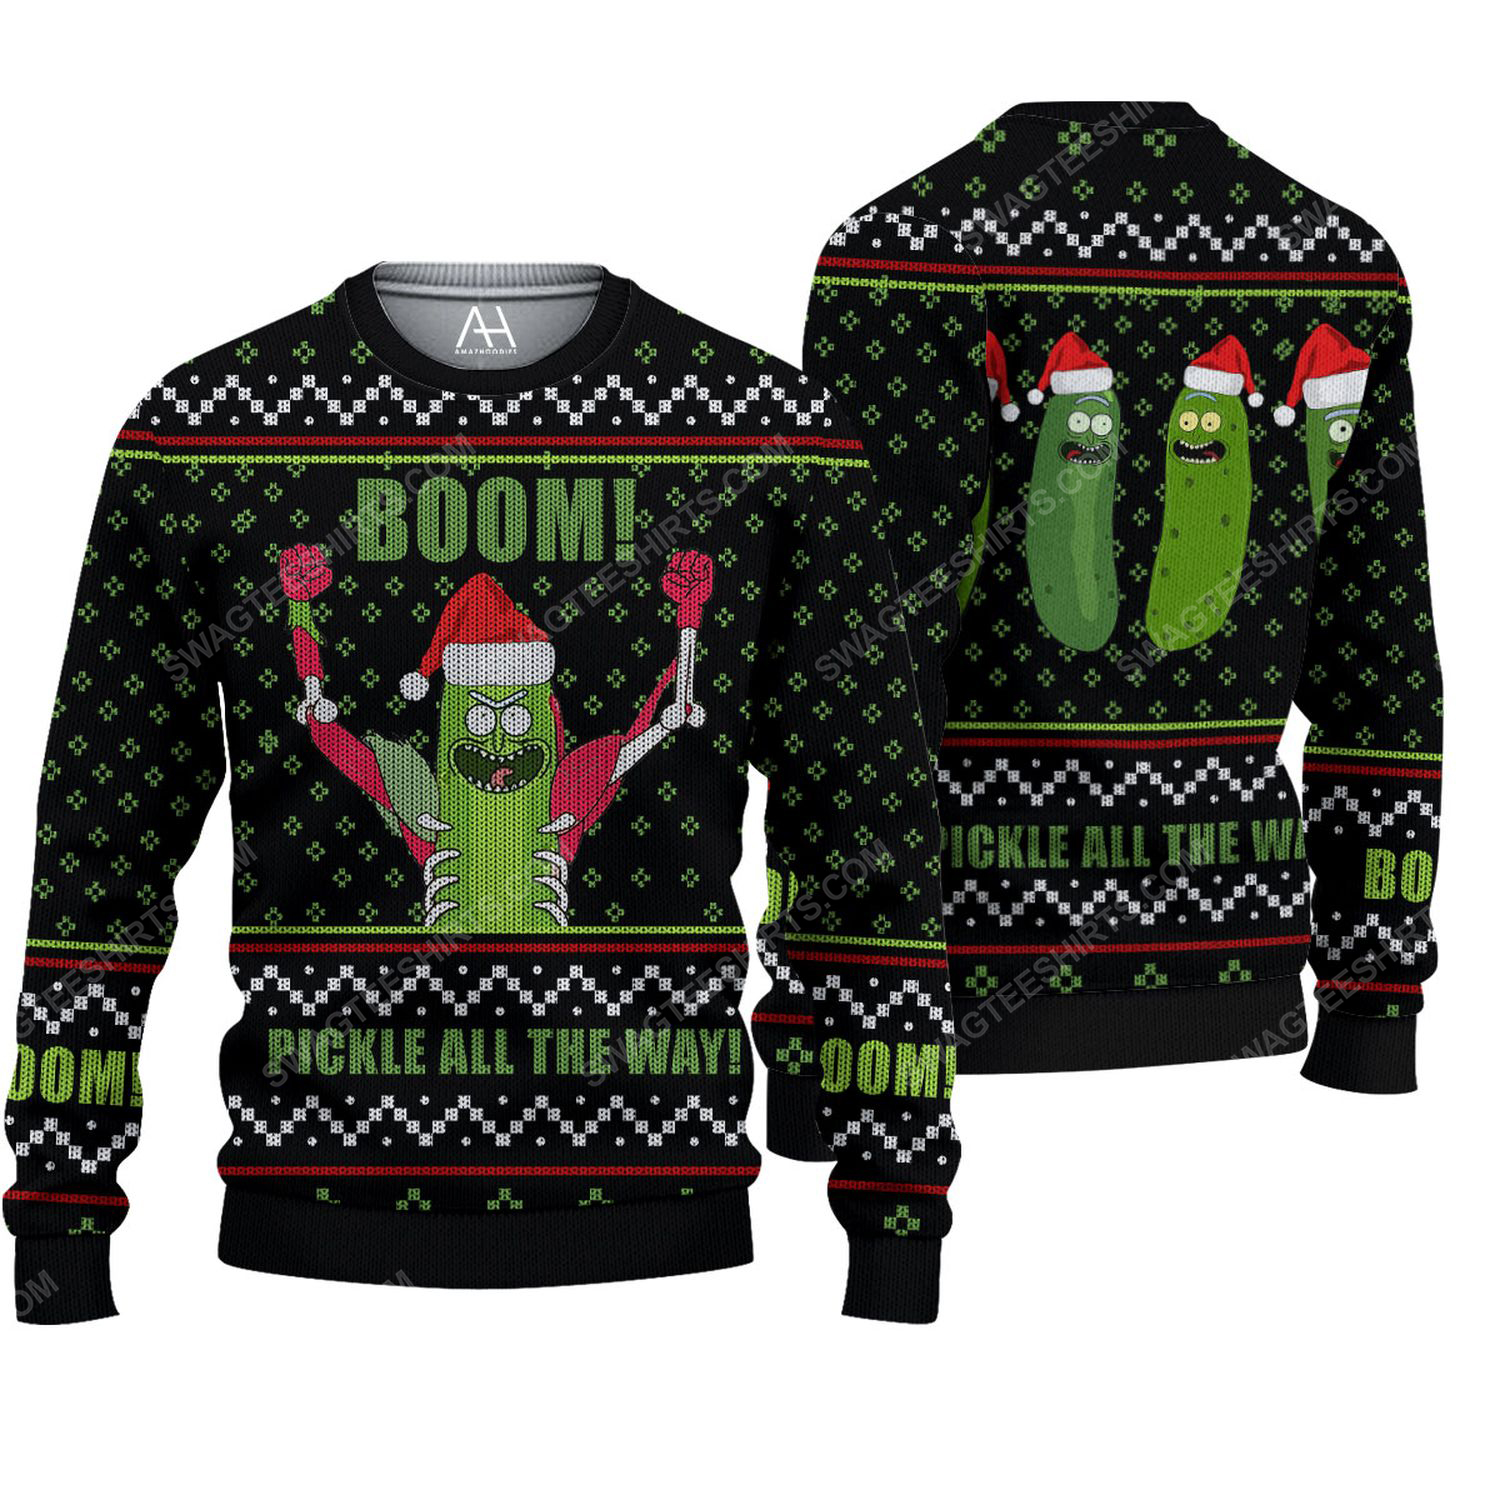 Rick and morty pickle all the way ugly christmas sweater 1 - Copy (3)